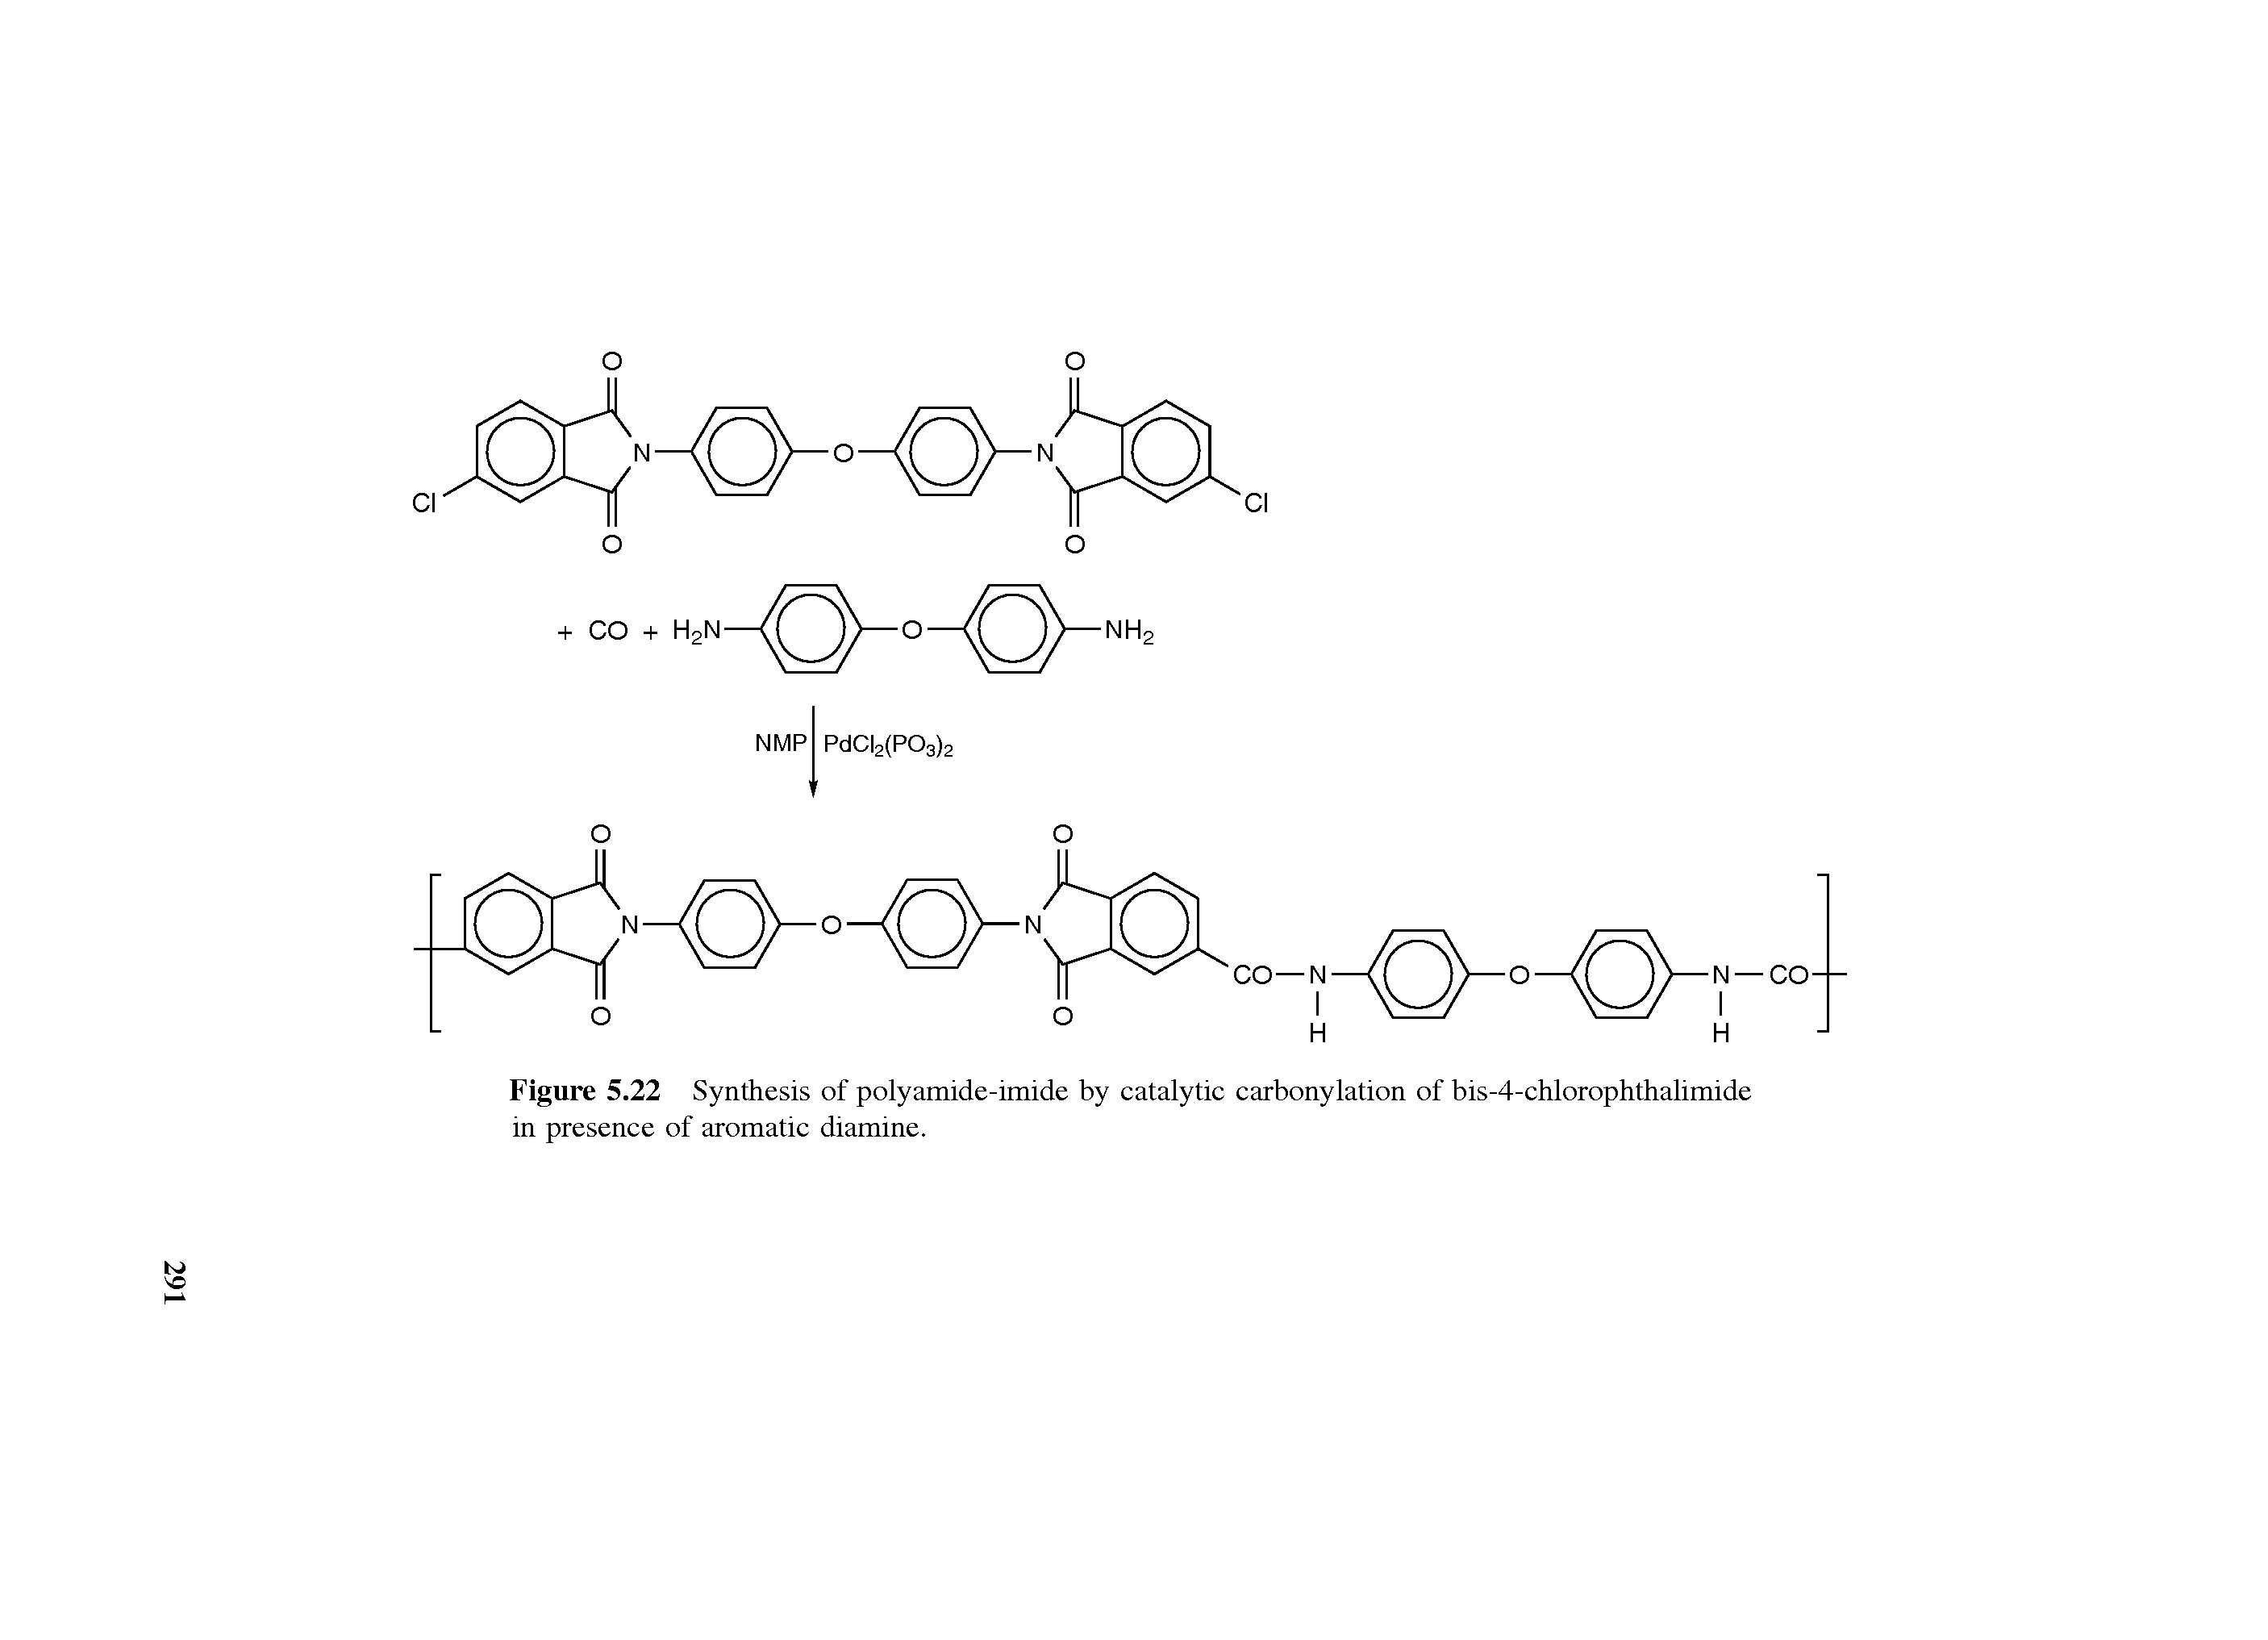 Figure 5.22 Synthesis of polyamide-imide by catalytic carbonylation of bis-4-chlorophthalimide in presence of aromatic diamine.